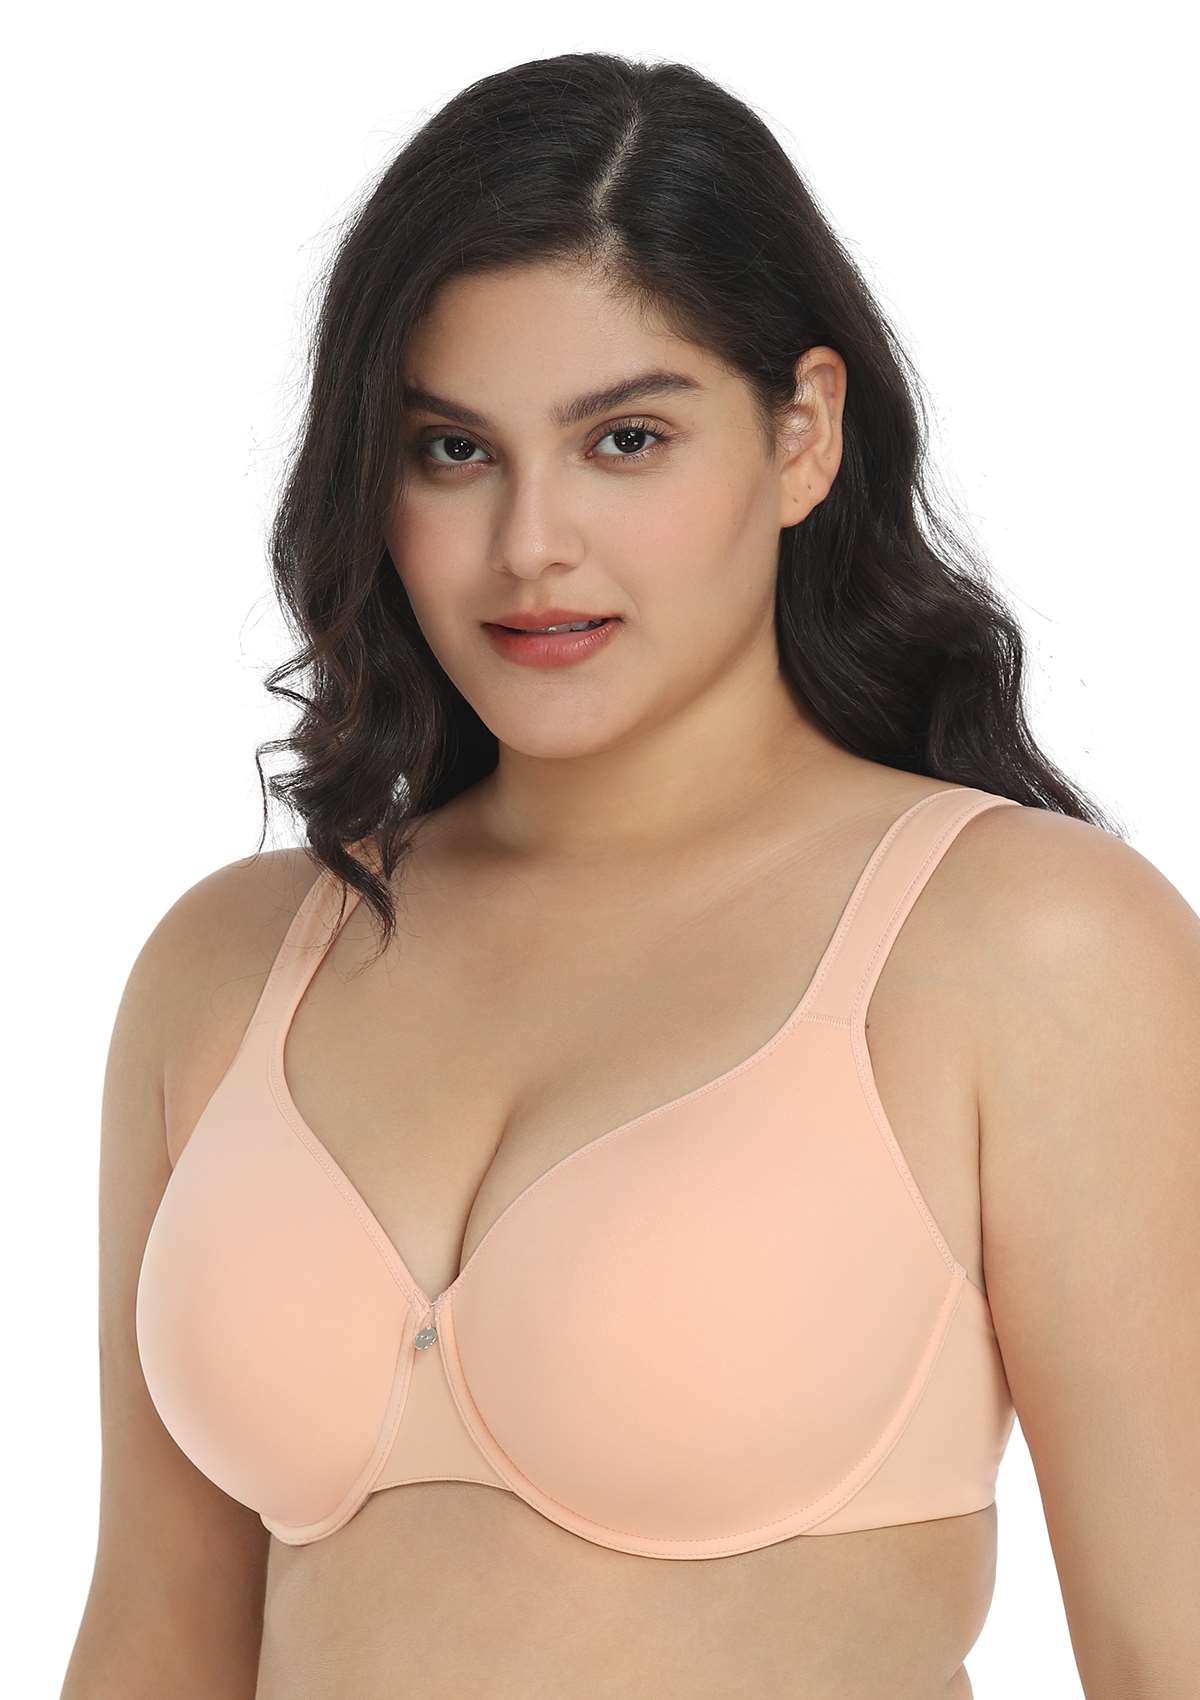 HSIA Patricia Smooth Classic T-shirt Lightly Padded Minimizer Bra - Light Pink / 36 / H